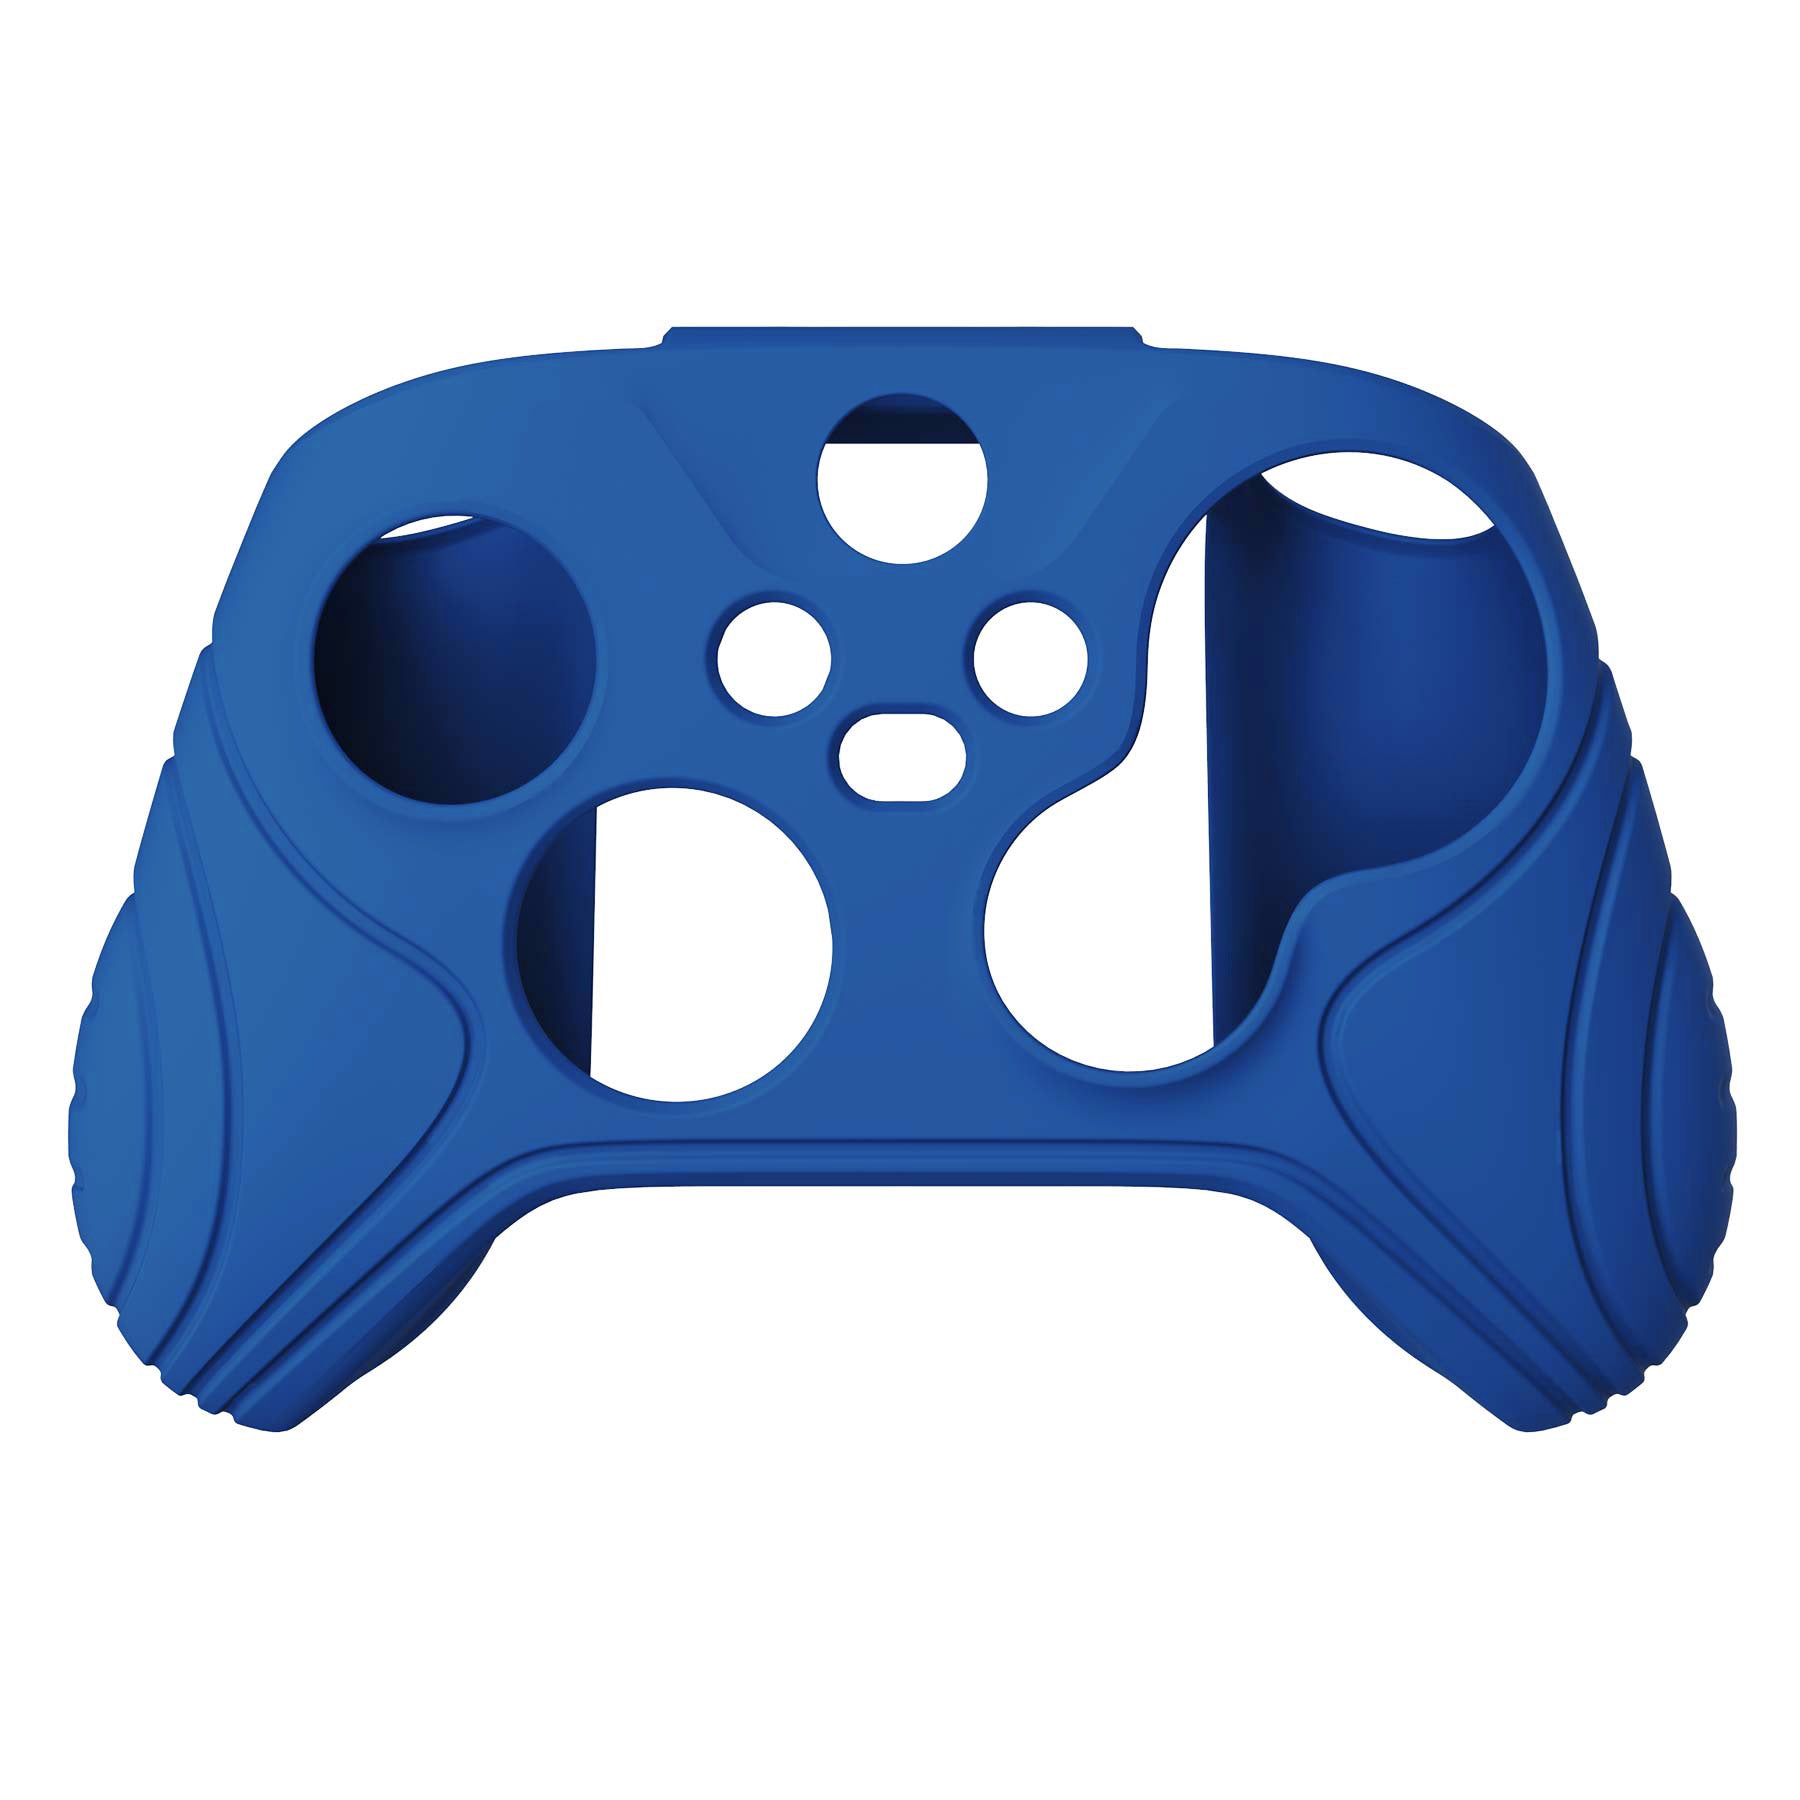 PlayVital Samurai Edition Blue Anti-slip Controller Grip Silicone Skin, Ergonomic Soft Rubber Protective Case Cover for Xbox Series S/X Controller with Black Thumb Stick Caps - WAX3008 PlayVital